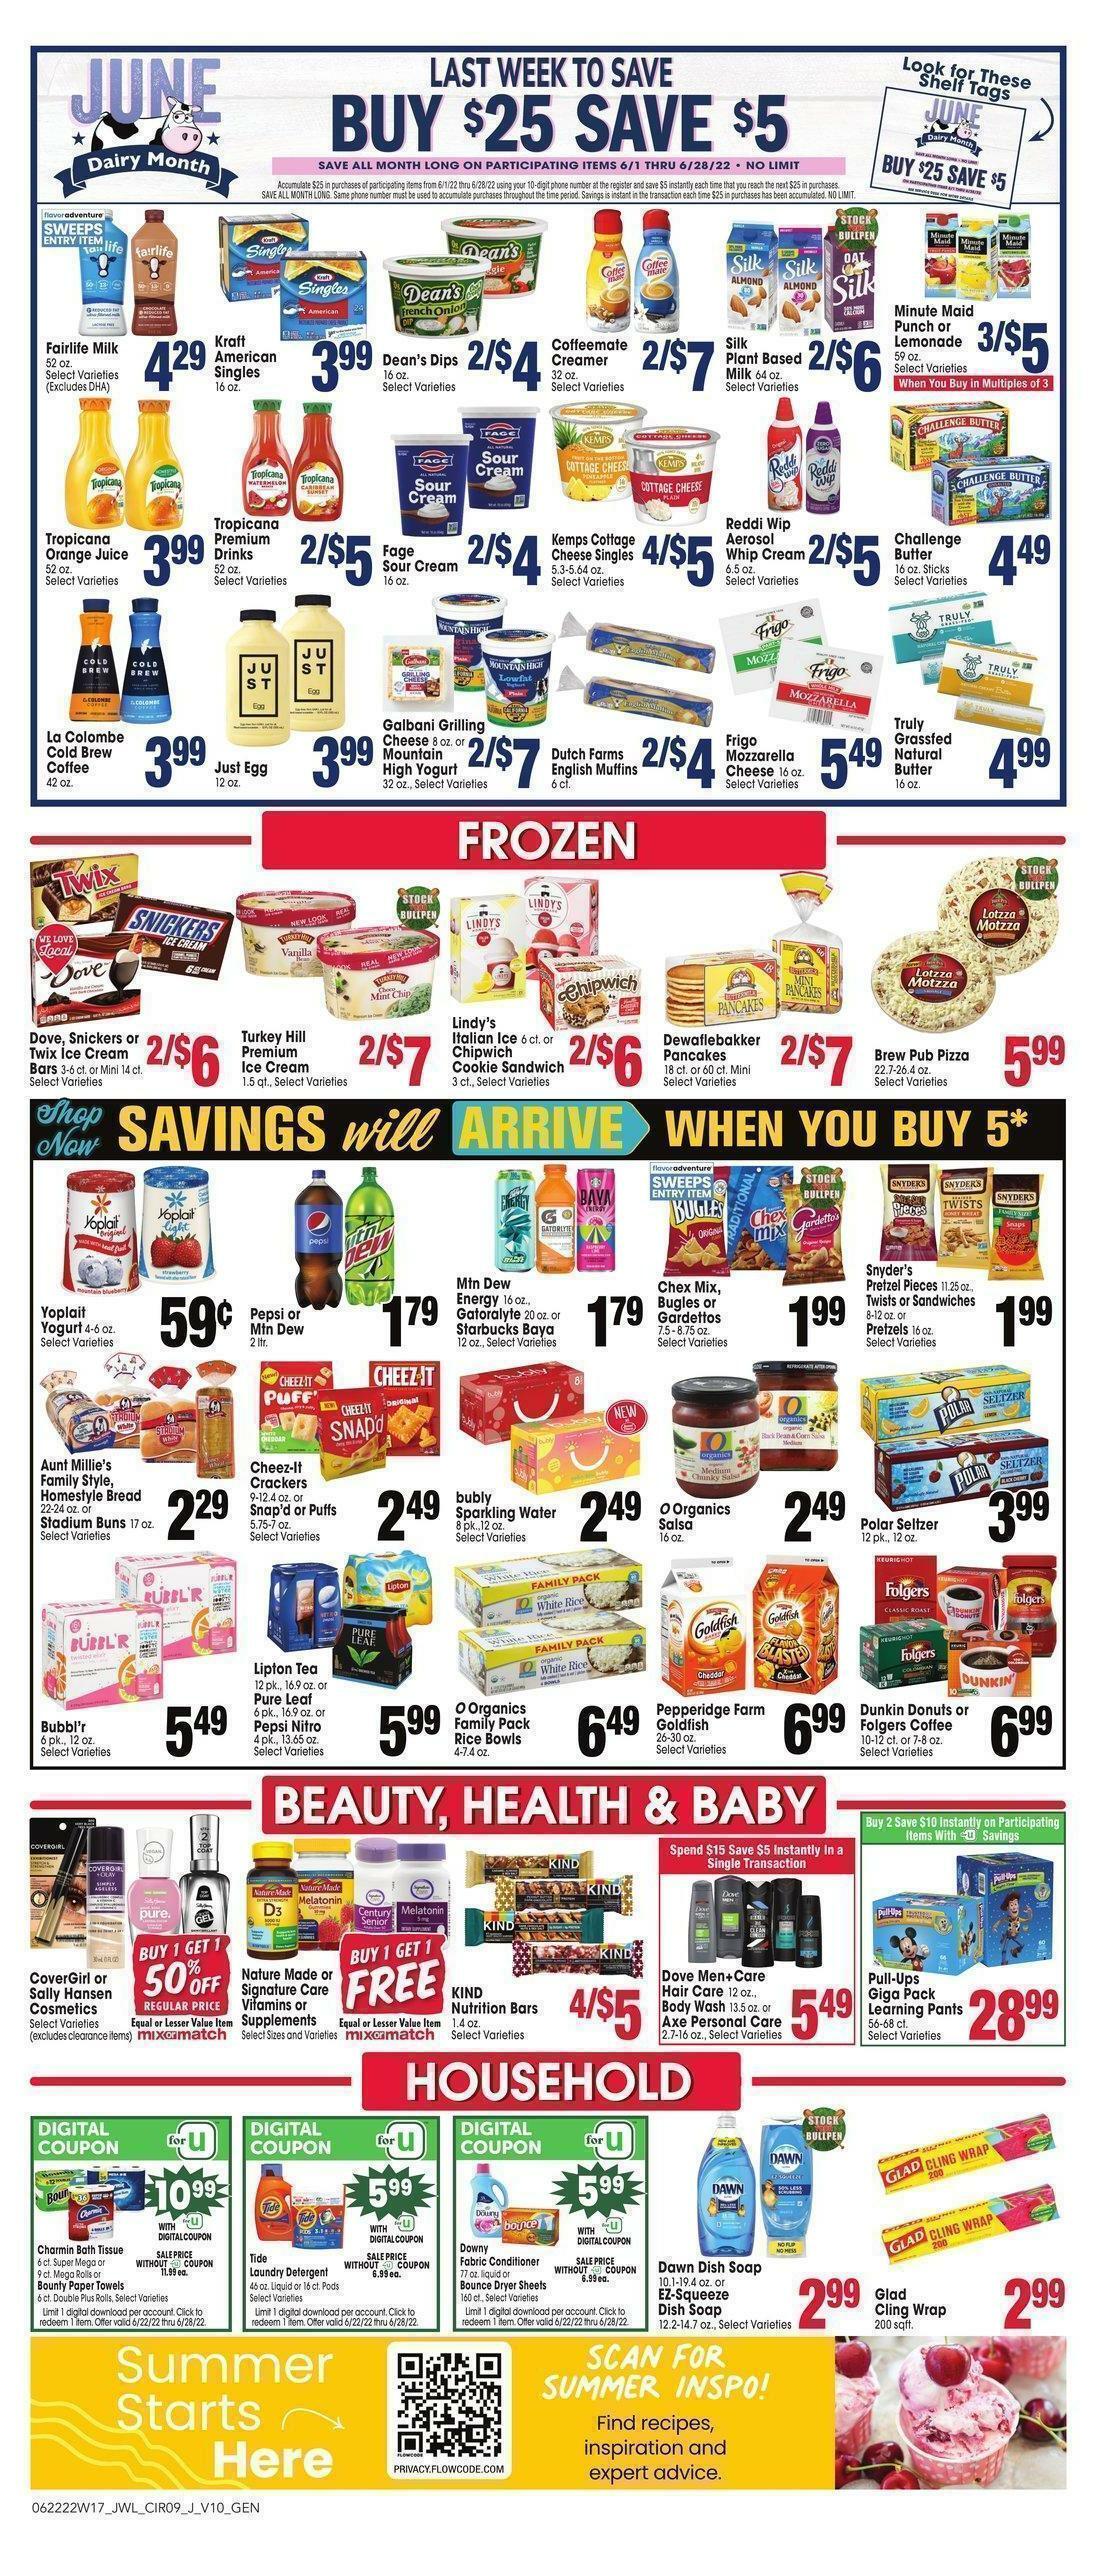 Jewel Osco Weekly Ad from June 22